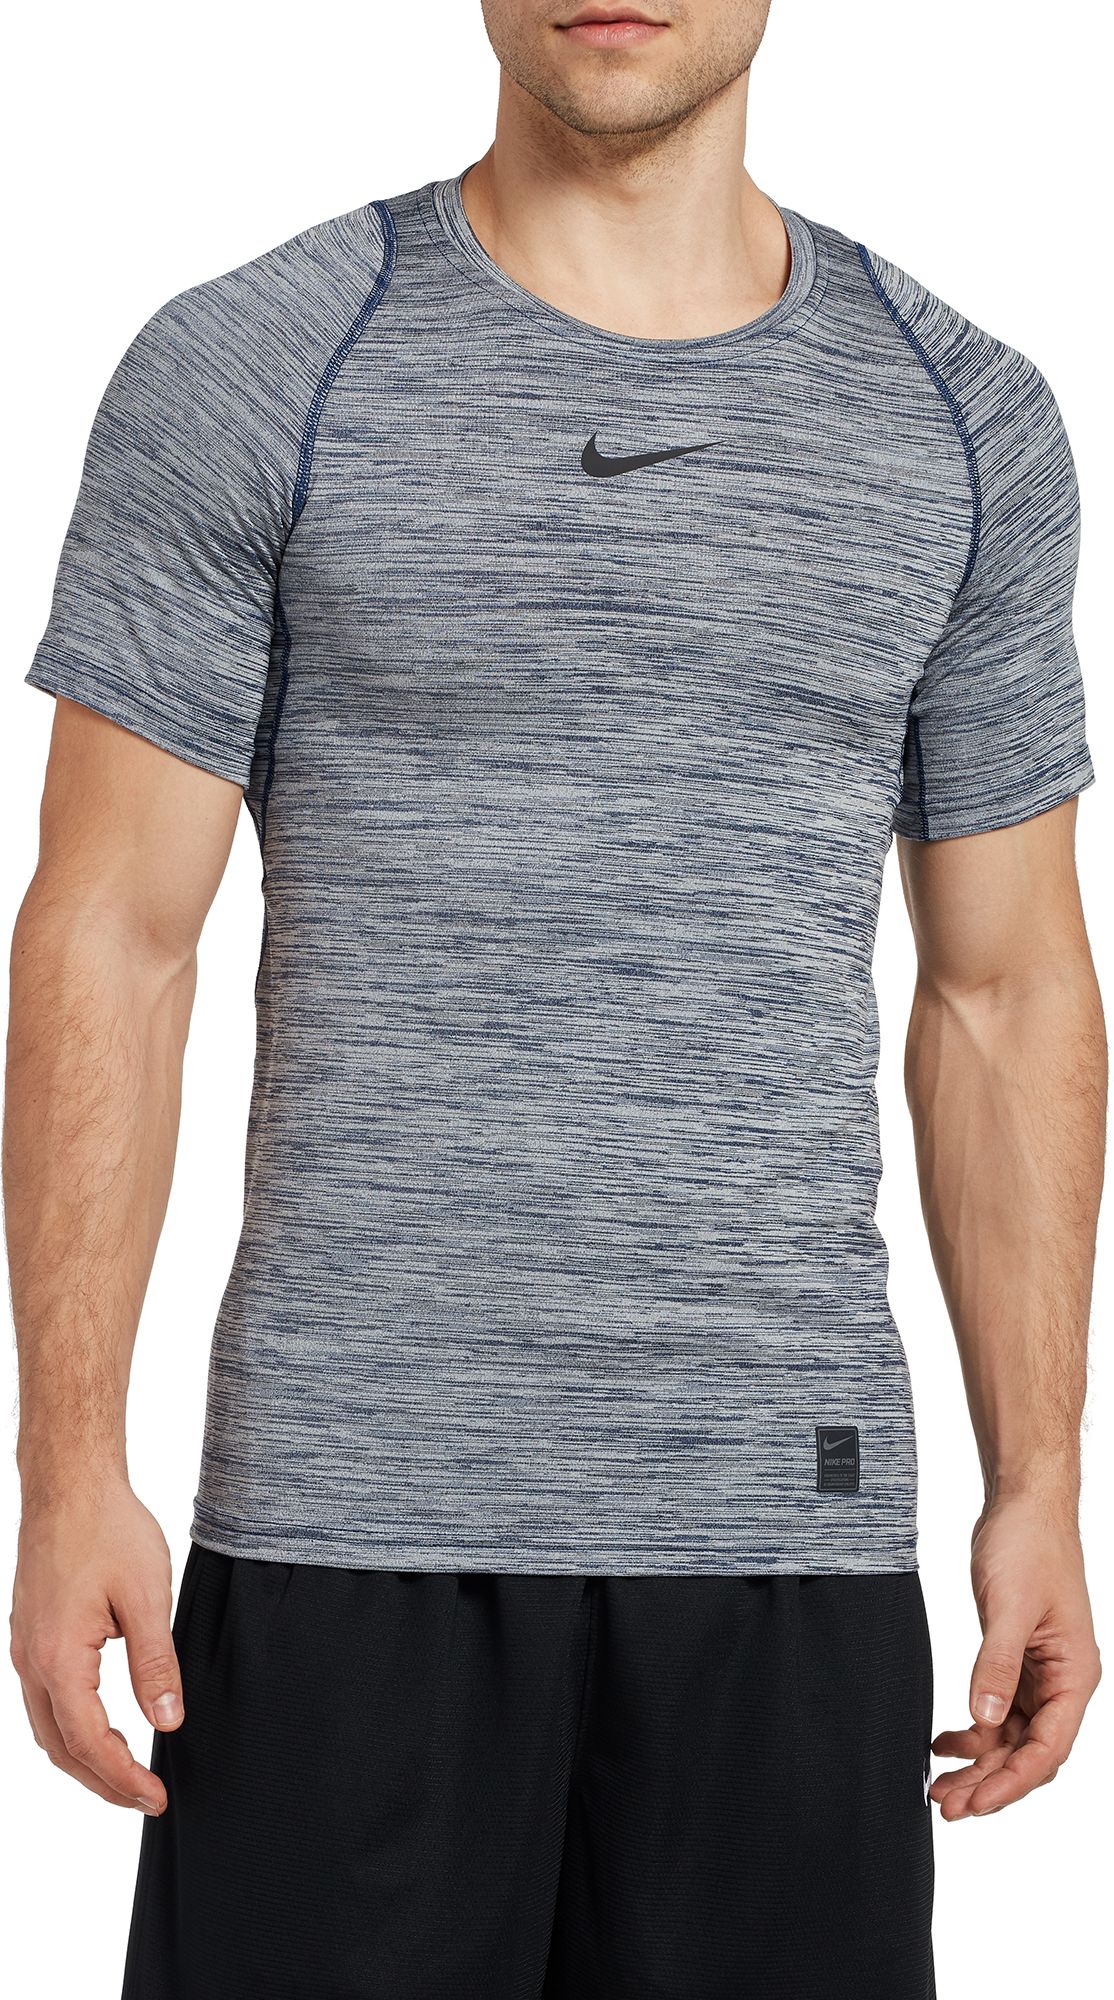 Nike Men's Pro Heather Printed Fitted T-Shirt - .97 - .97